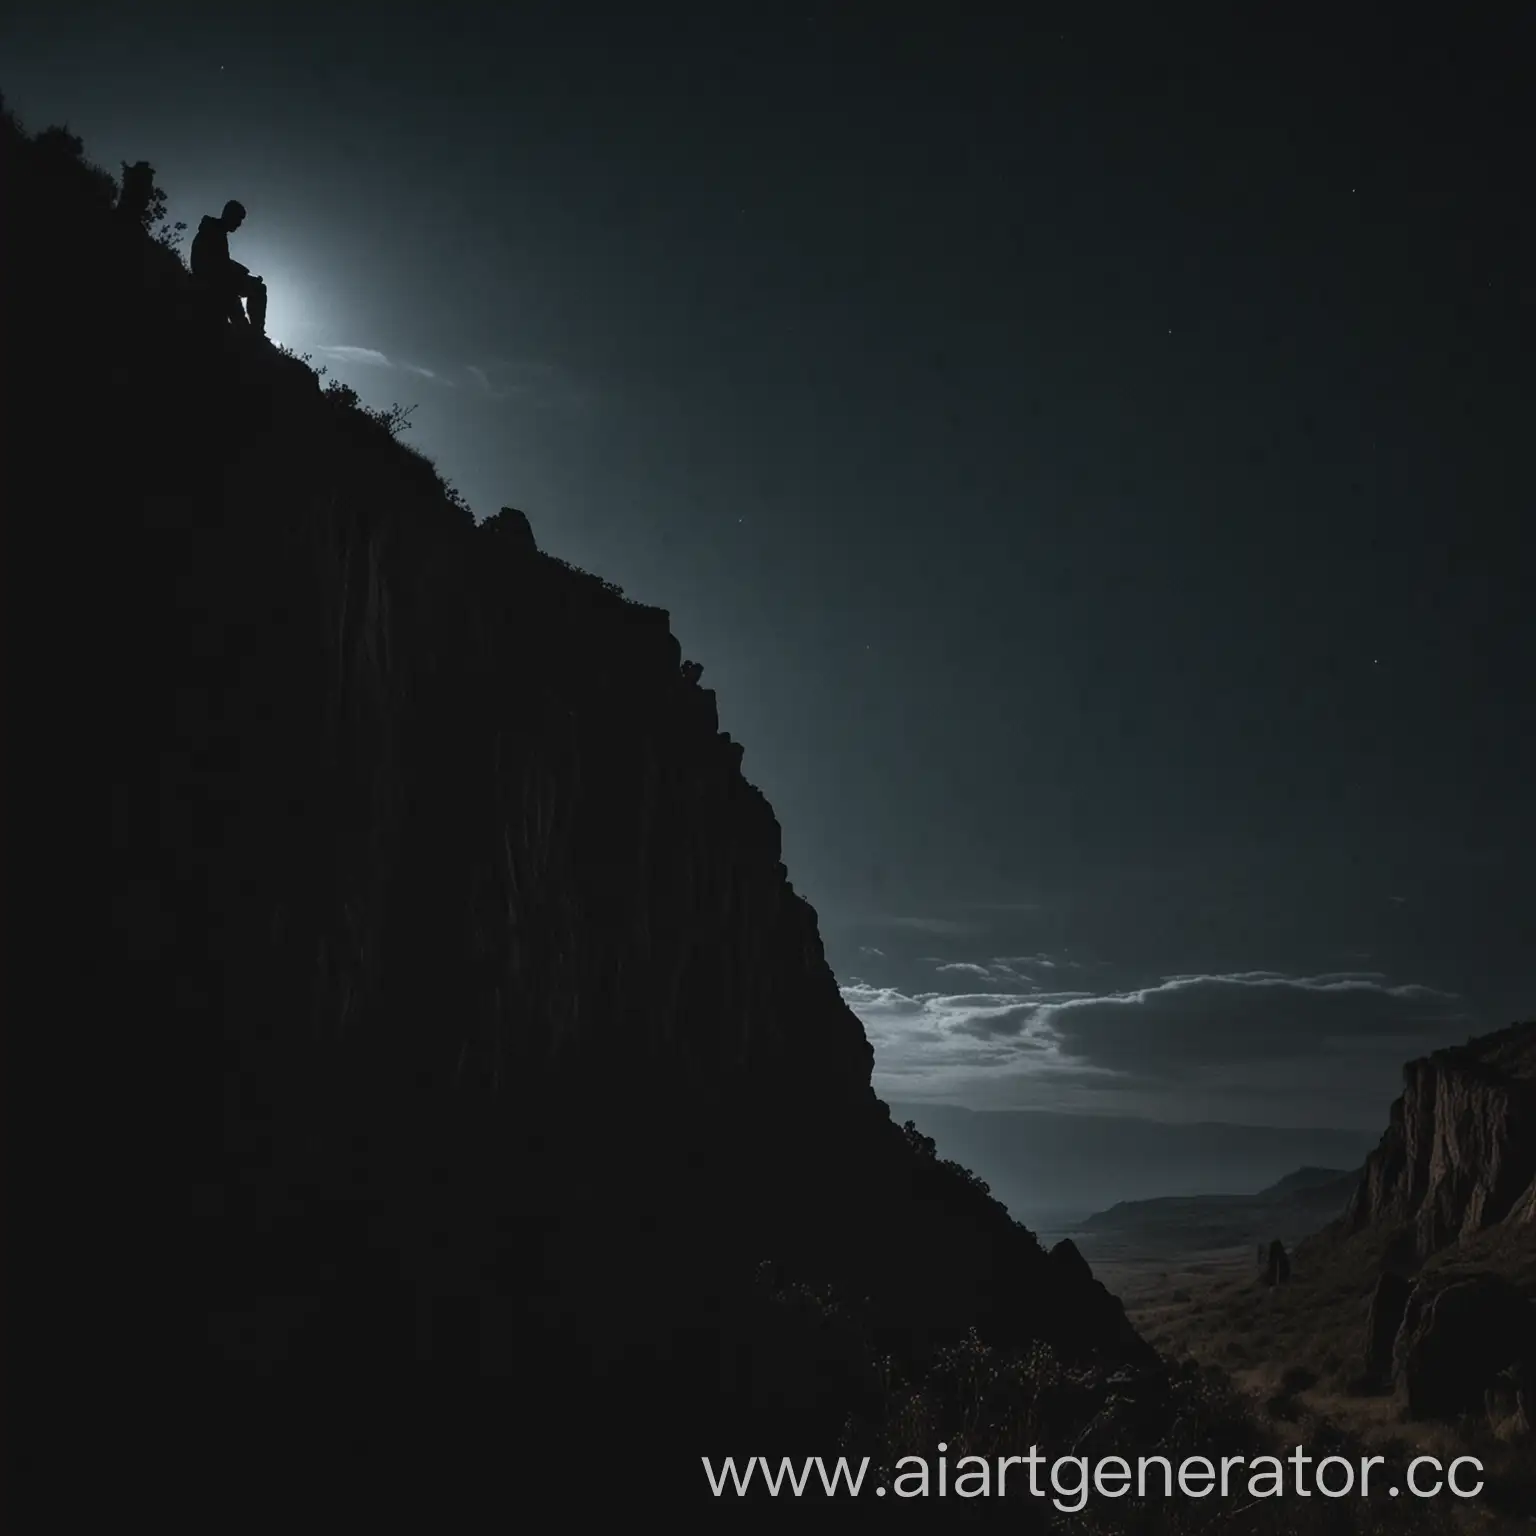 Solitary-Figure-Contemplating-Cliffside-in-Moonlight